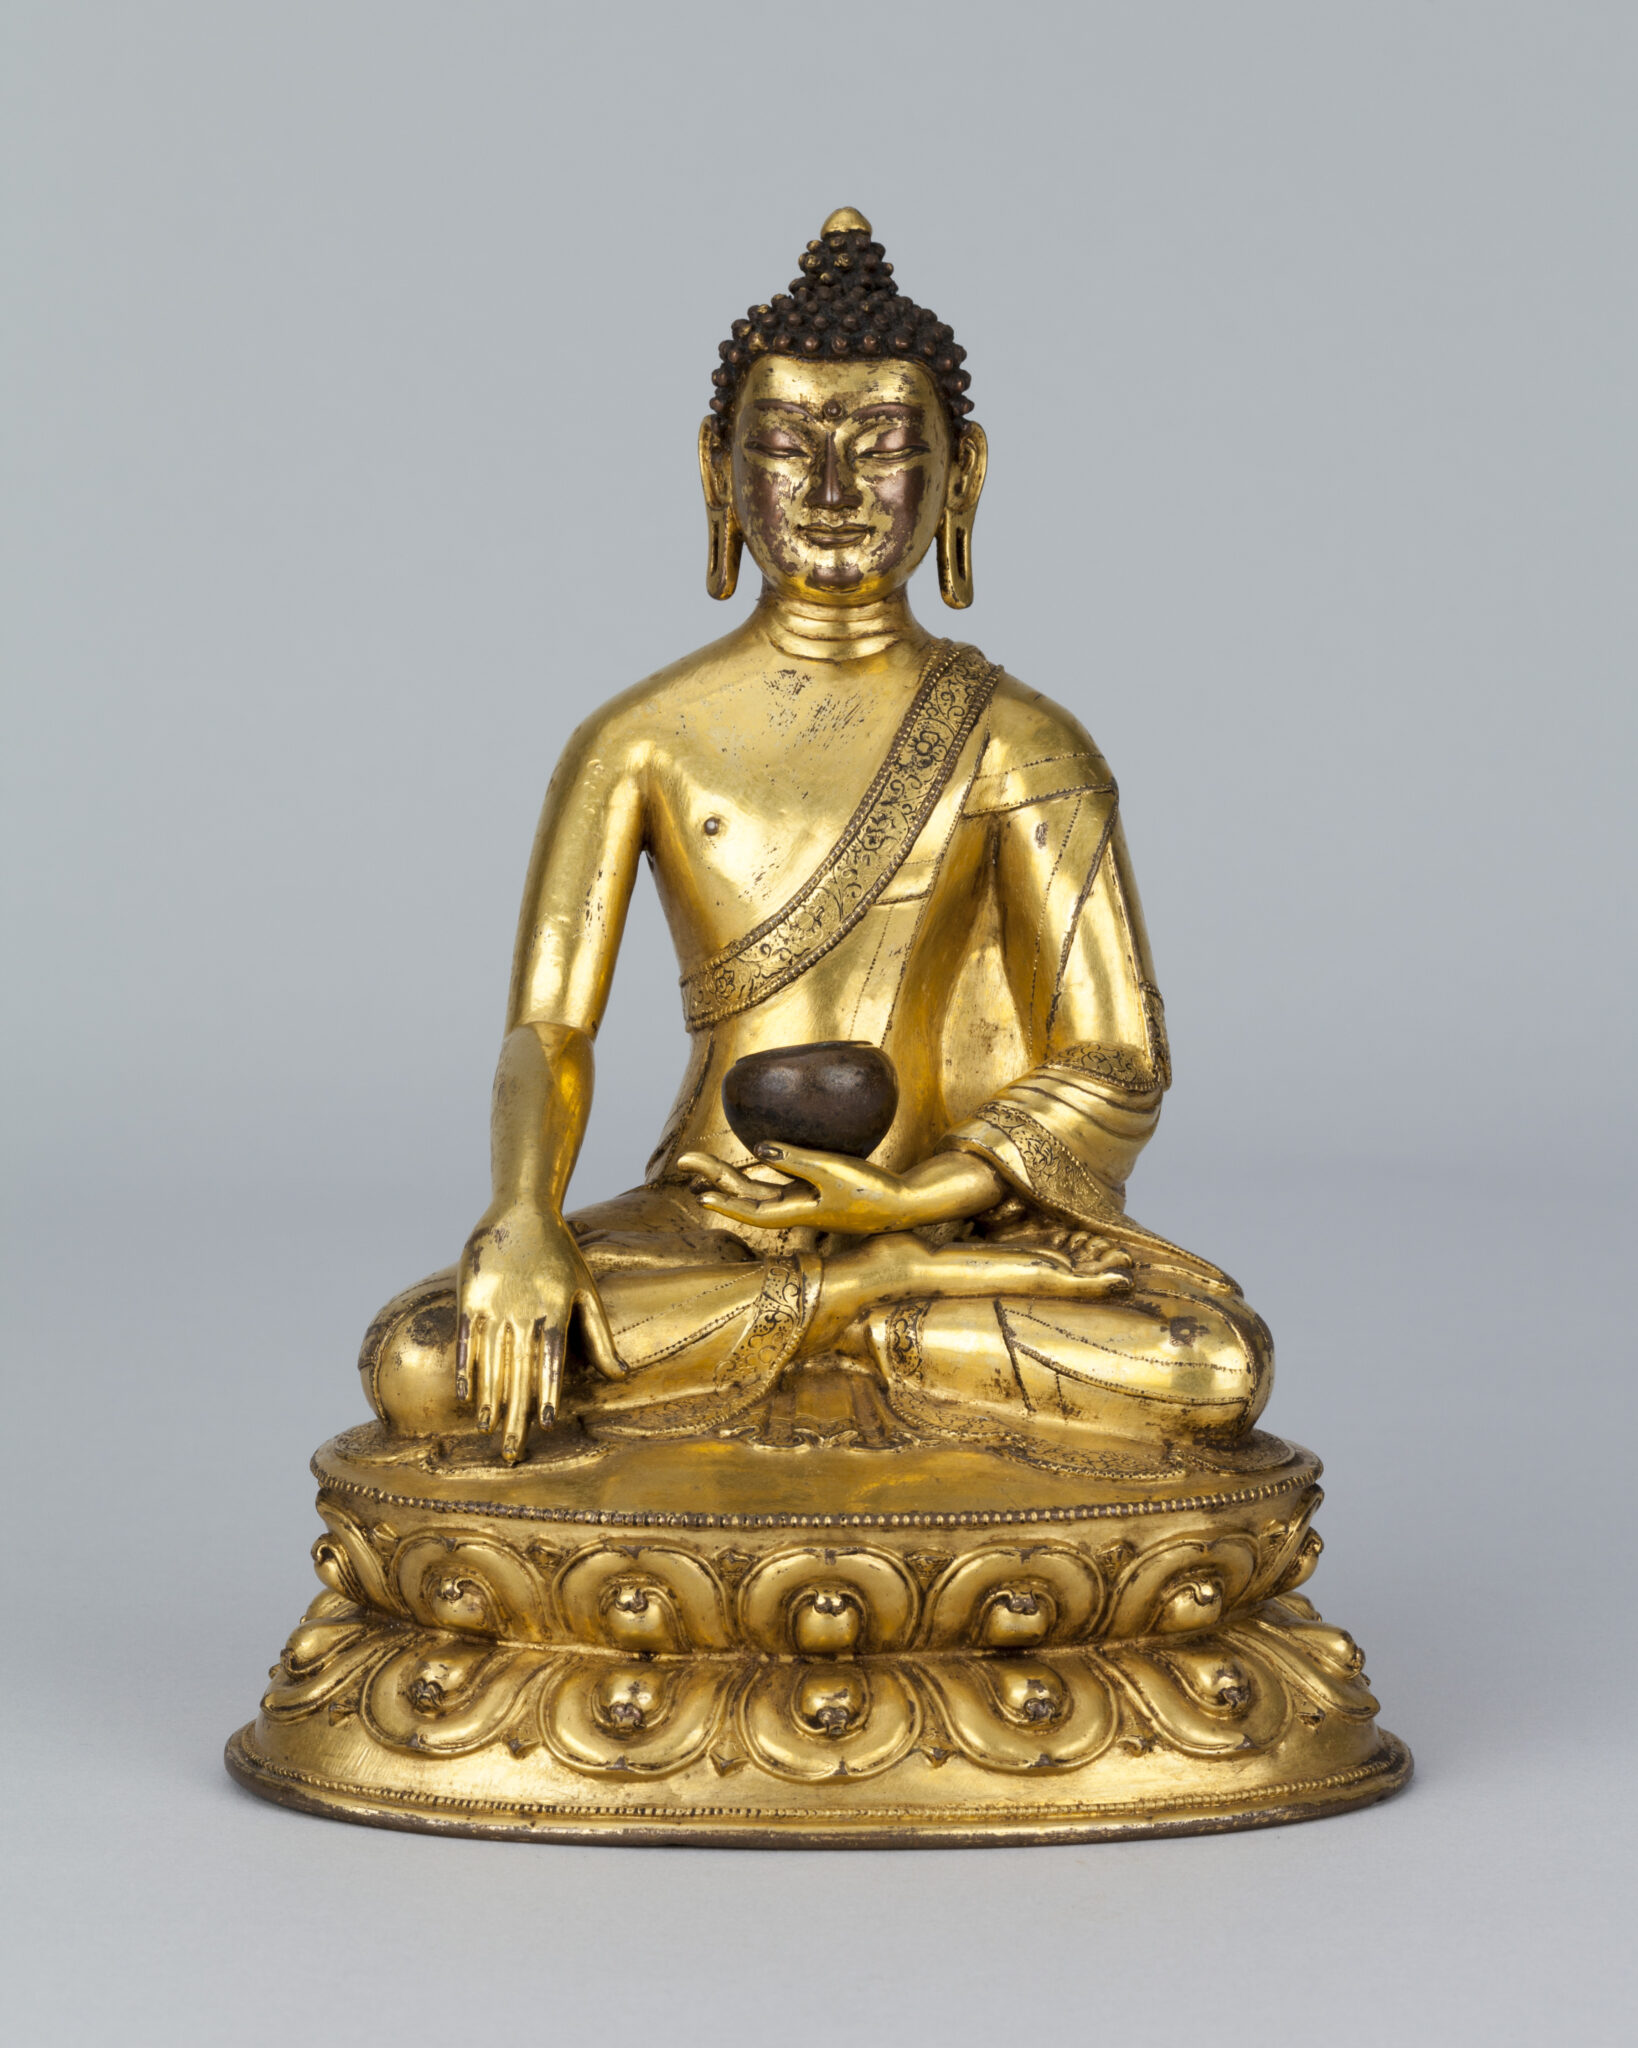 Golden statue depicting seated Buddha holding bowl in lap, left hand touching ground